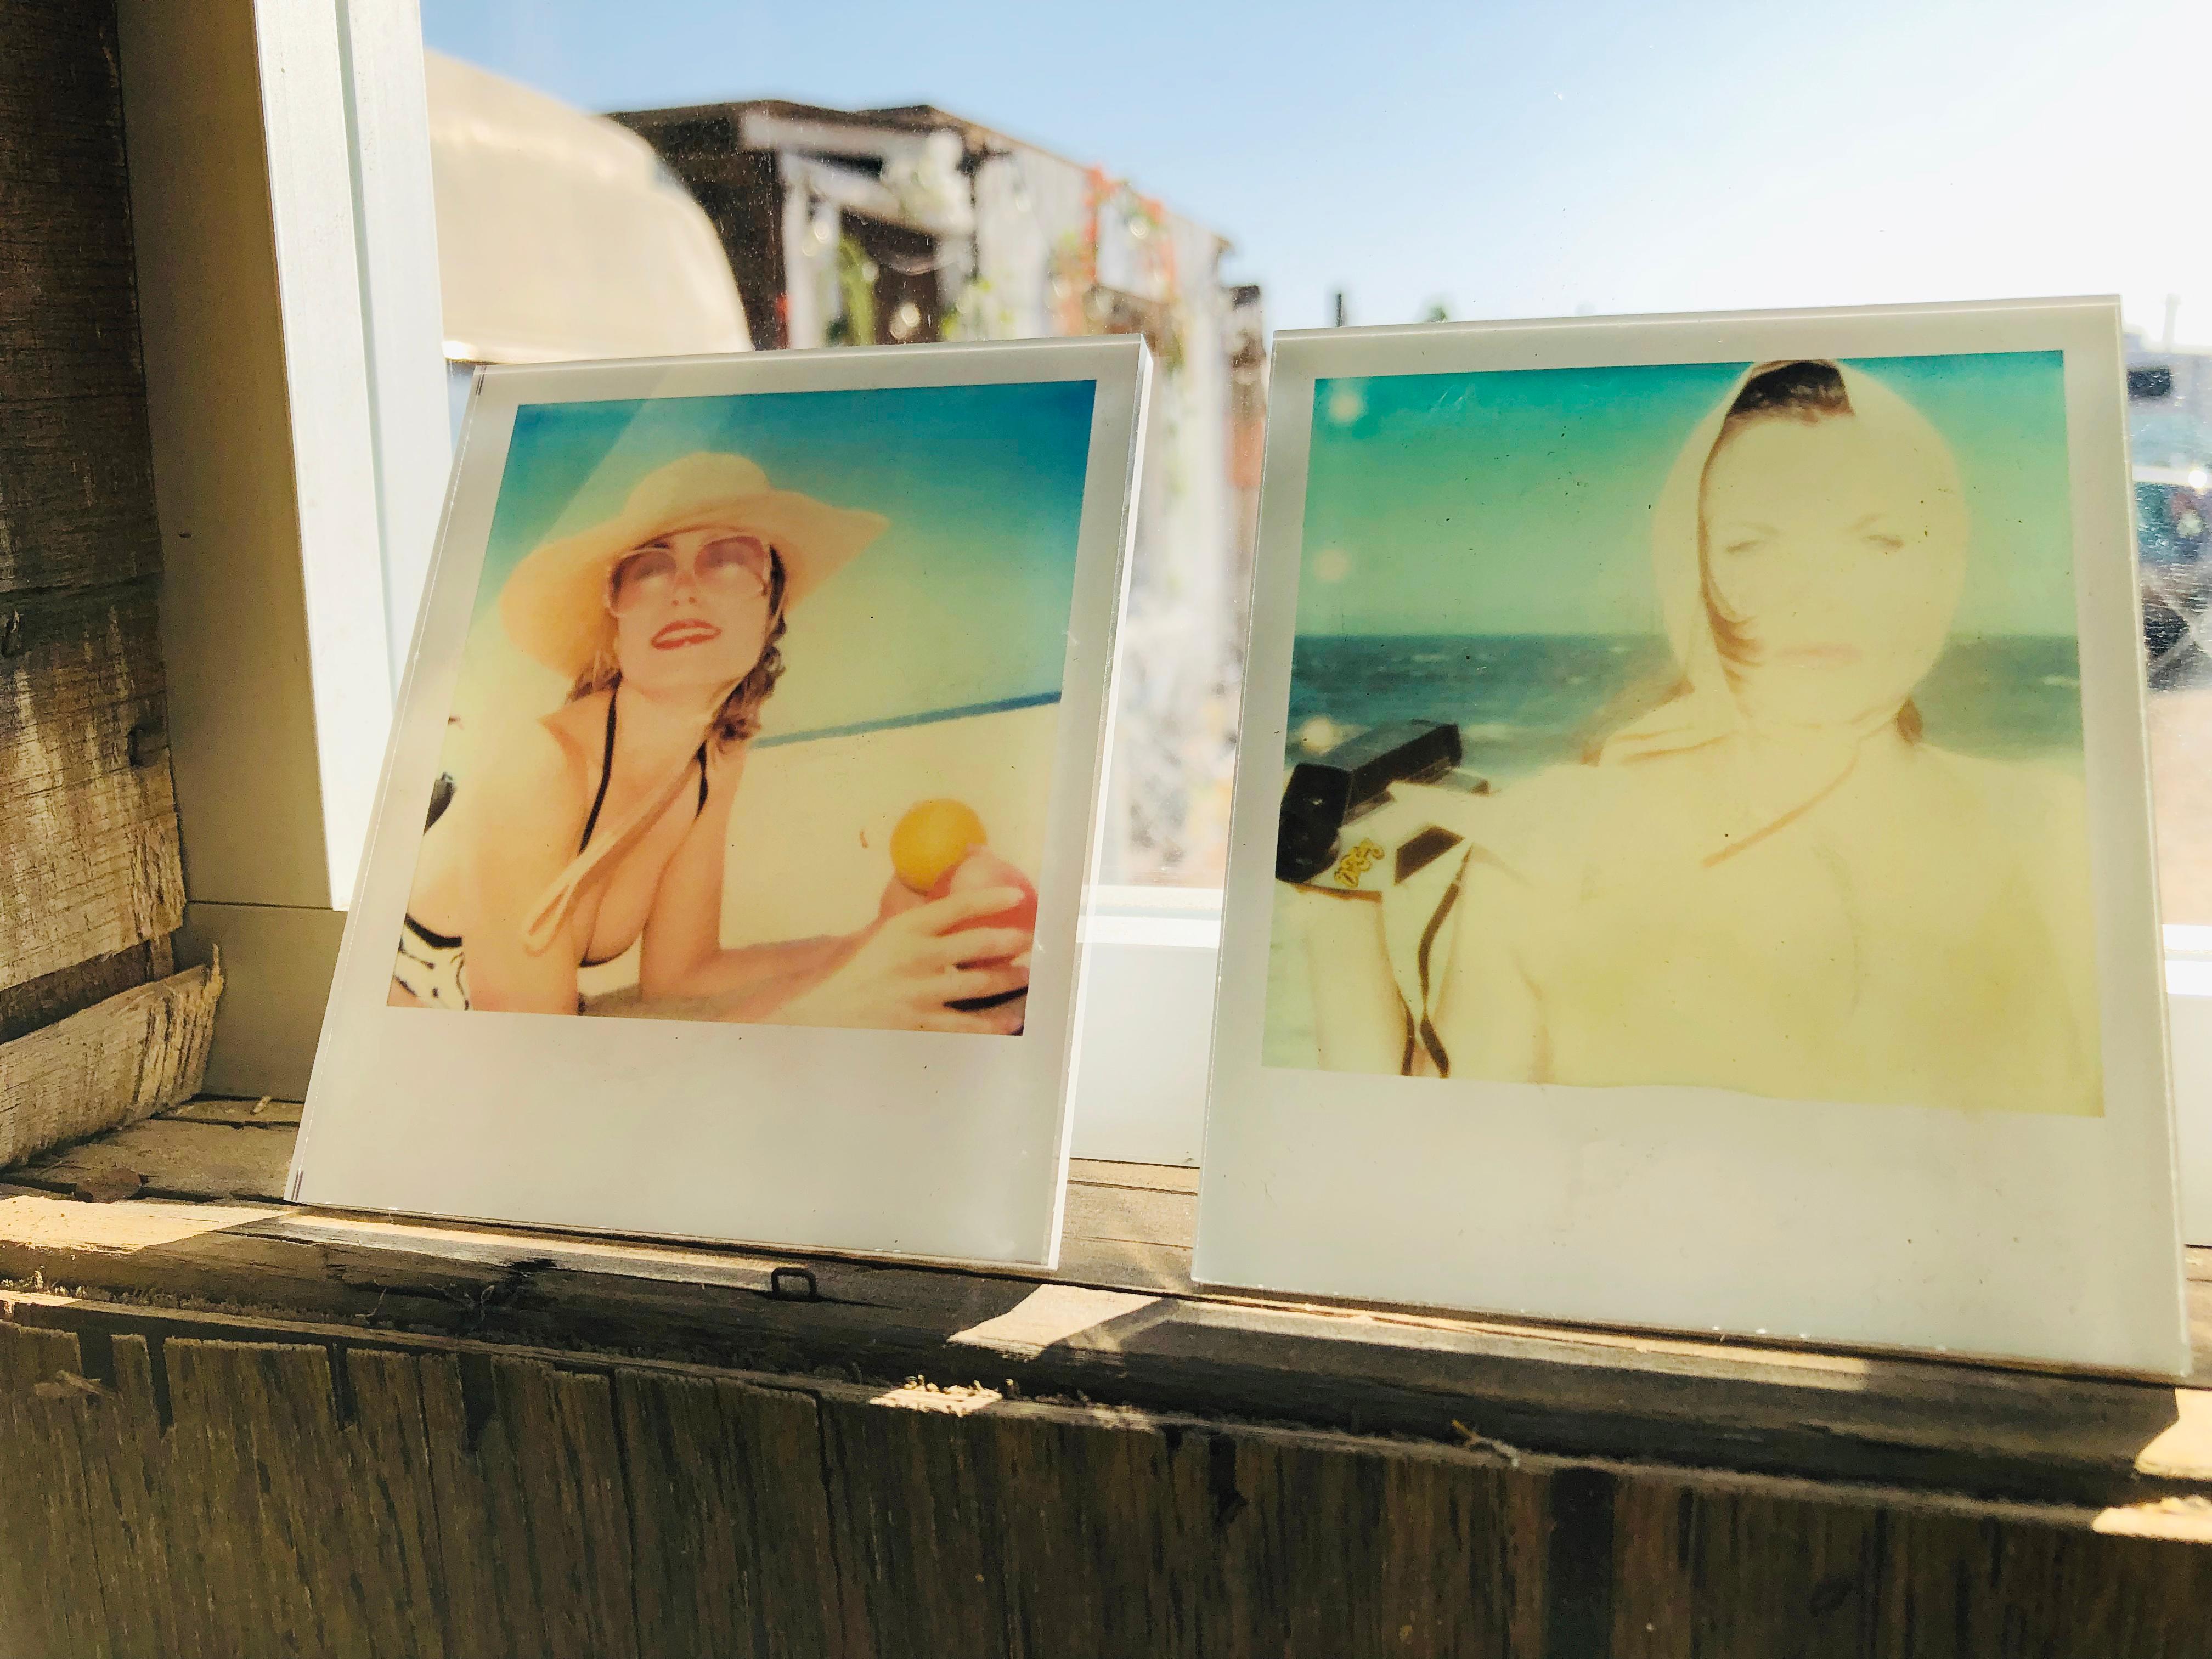 Stefanie Schneider's Minis
'Untitled #03' (Beachshoot) featuring Radha Mitchell, 2005
signed and signature brand on verso
Lambda digital Color Photograph based on a Polaroid

Polaroid sized open Editions 1999-2013
10.7 x 8.8cm (Image